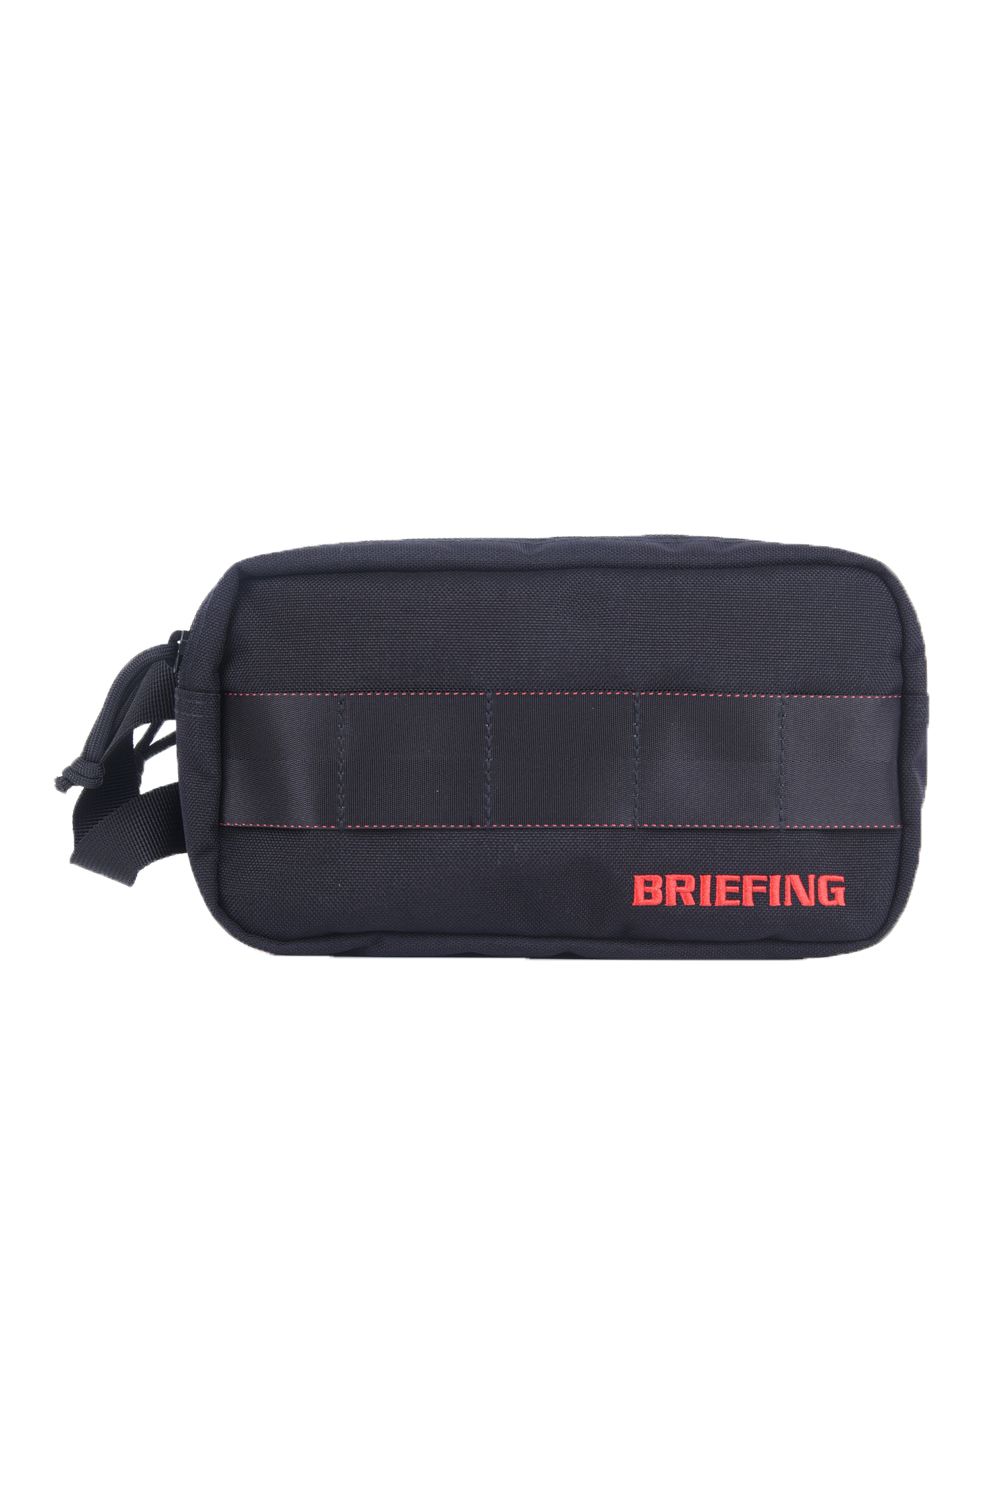 BRIEFING - 【1000Dコーデュラナイロン】 DOUBLE ZIP POUCH-3 GOLF 